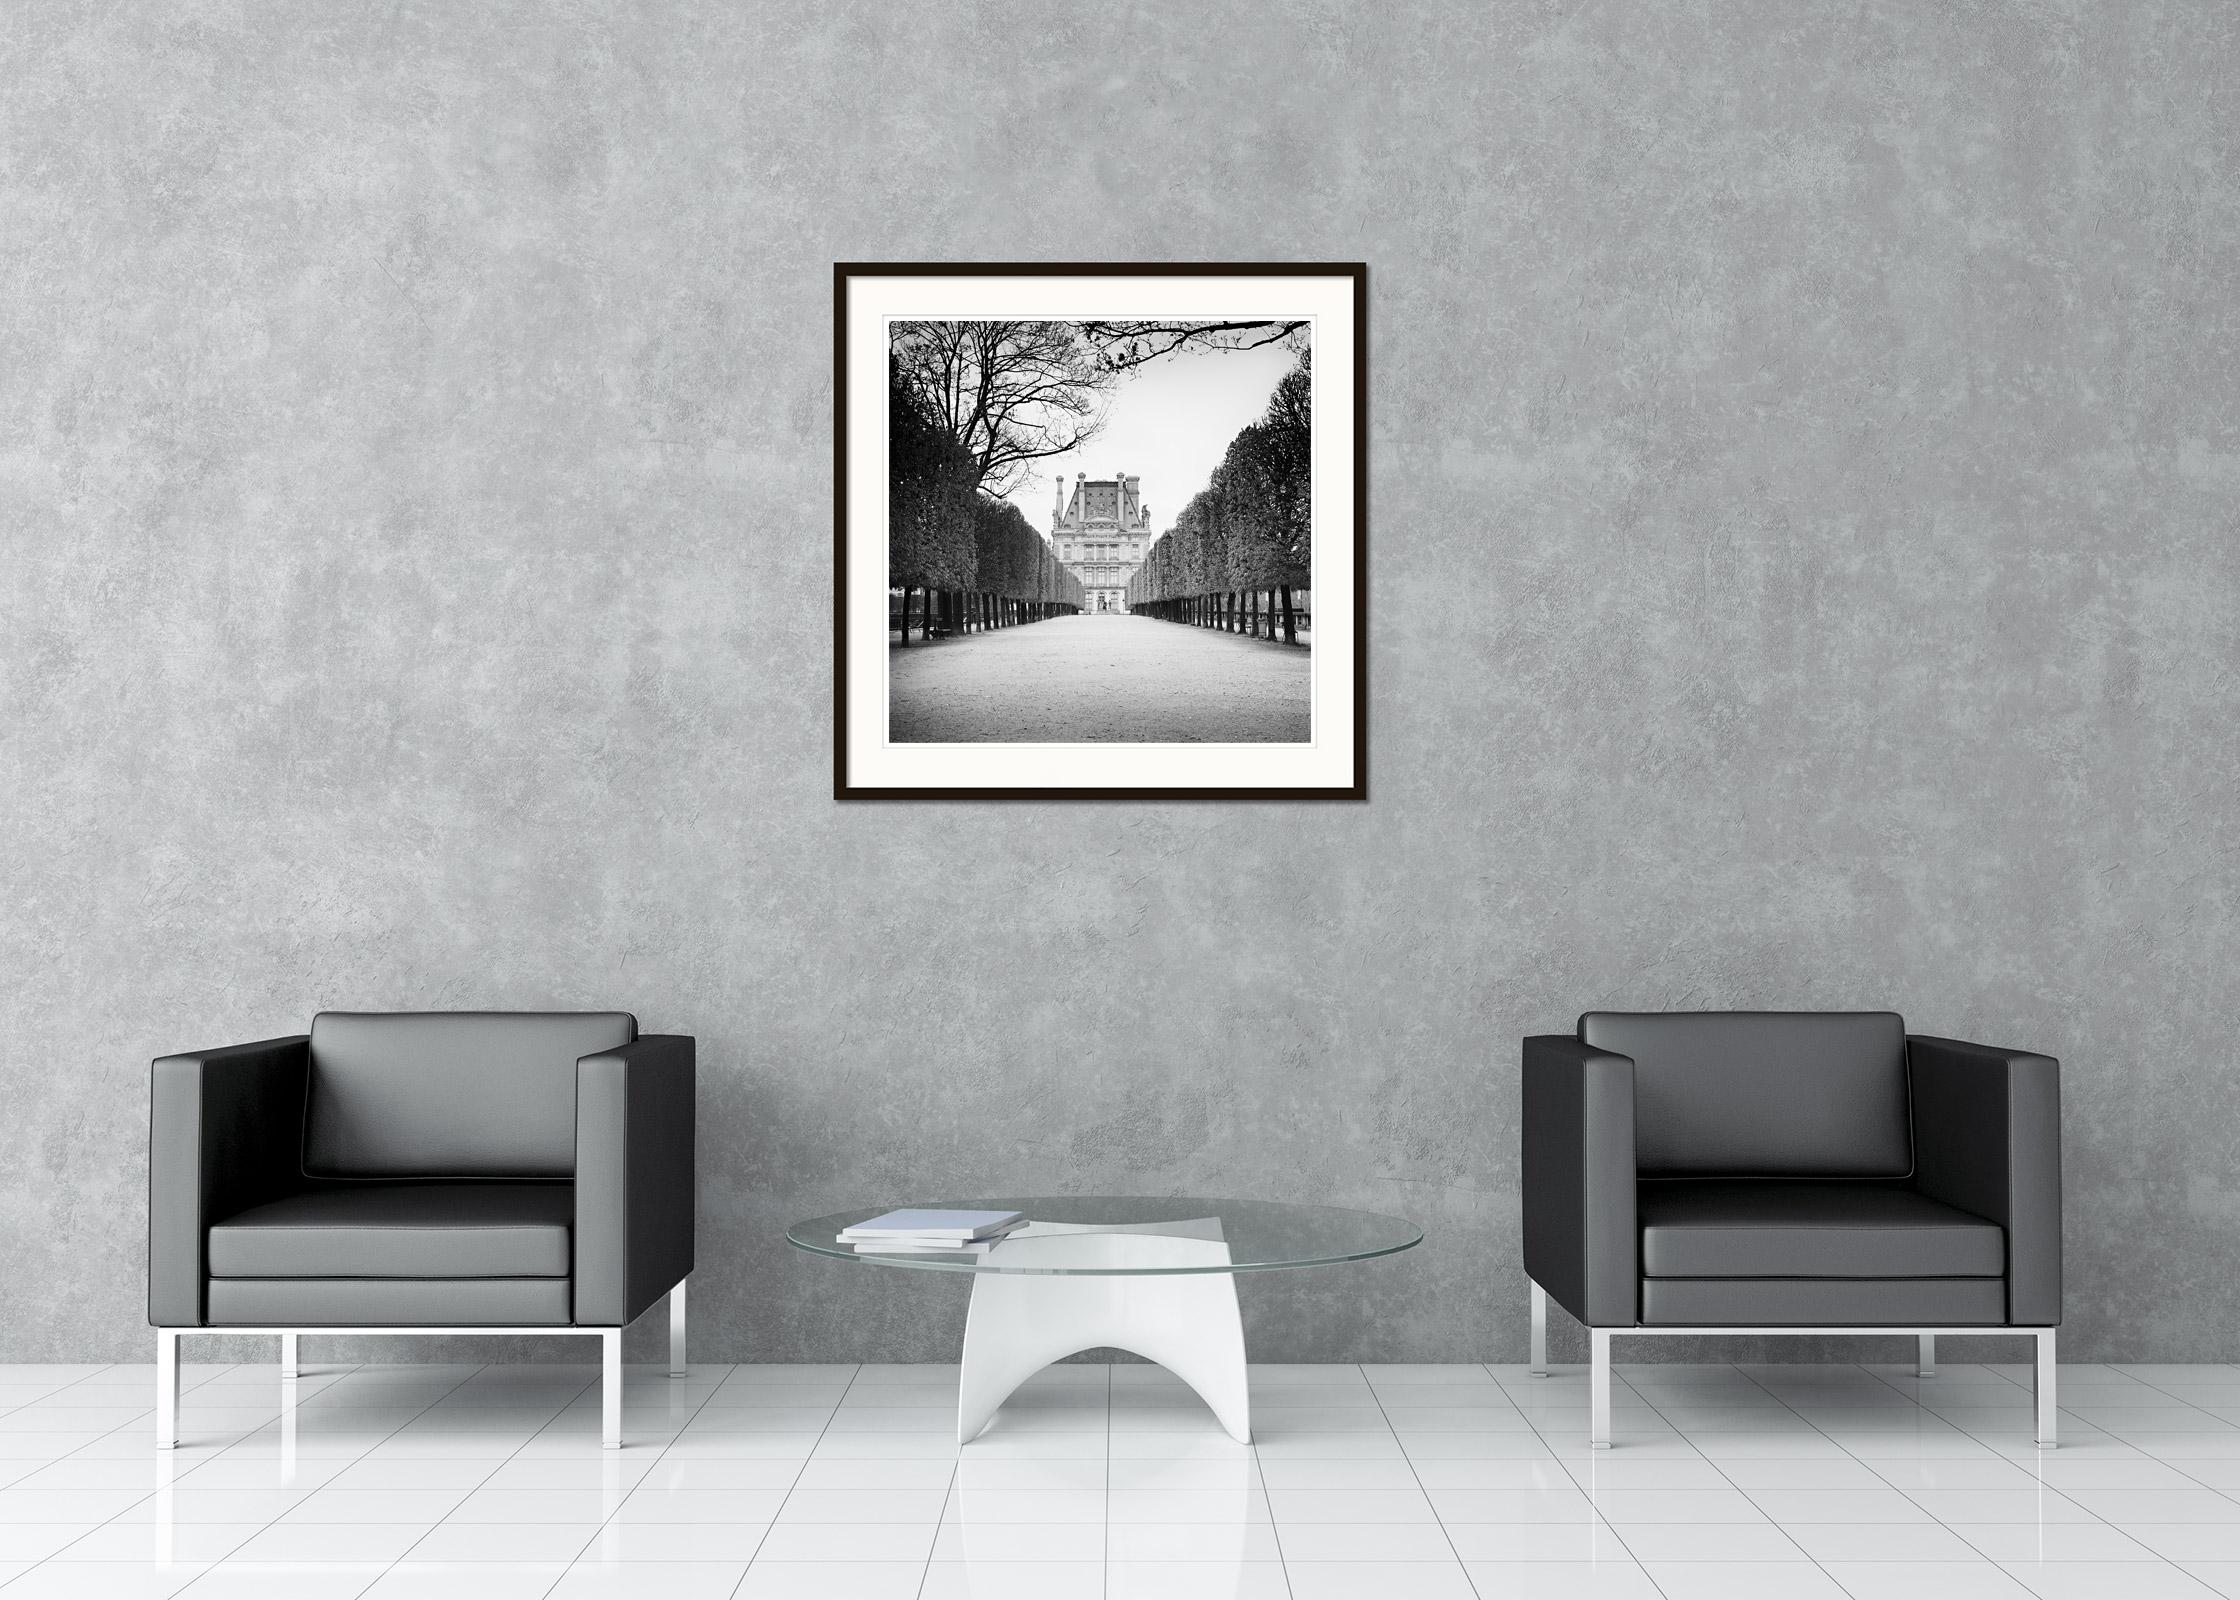 Gerald Berghammer - Limited edition of 9.
Archival fine art pigment print. Signed, titled, dated and numbered by artist. Certificate of authenticity included. Printed with 4cm white border.

2x 23.63 x 23.63 in. (60 x 60 cm) edition of 9

Gerald